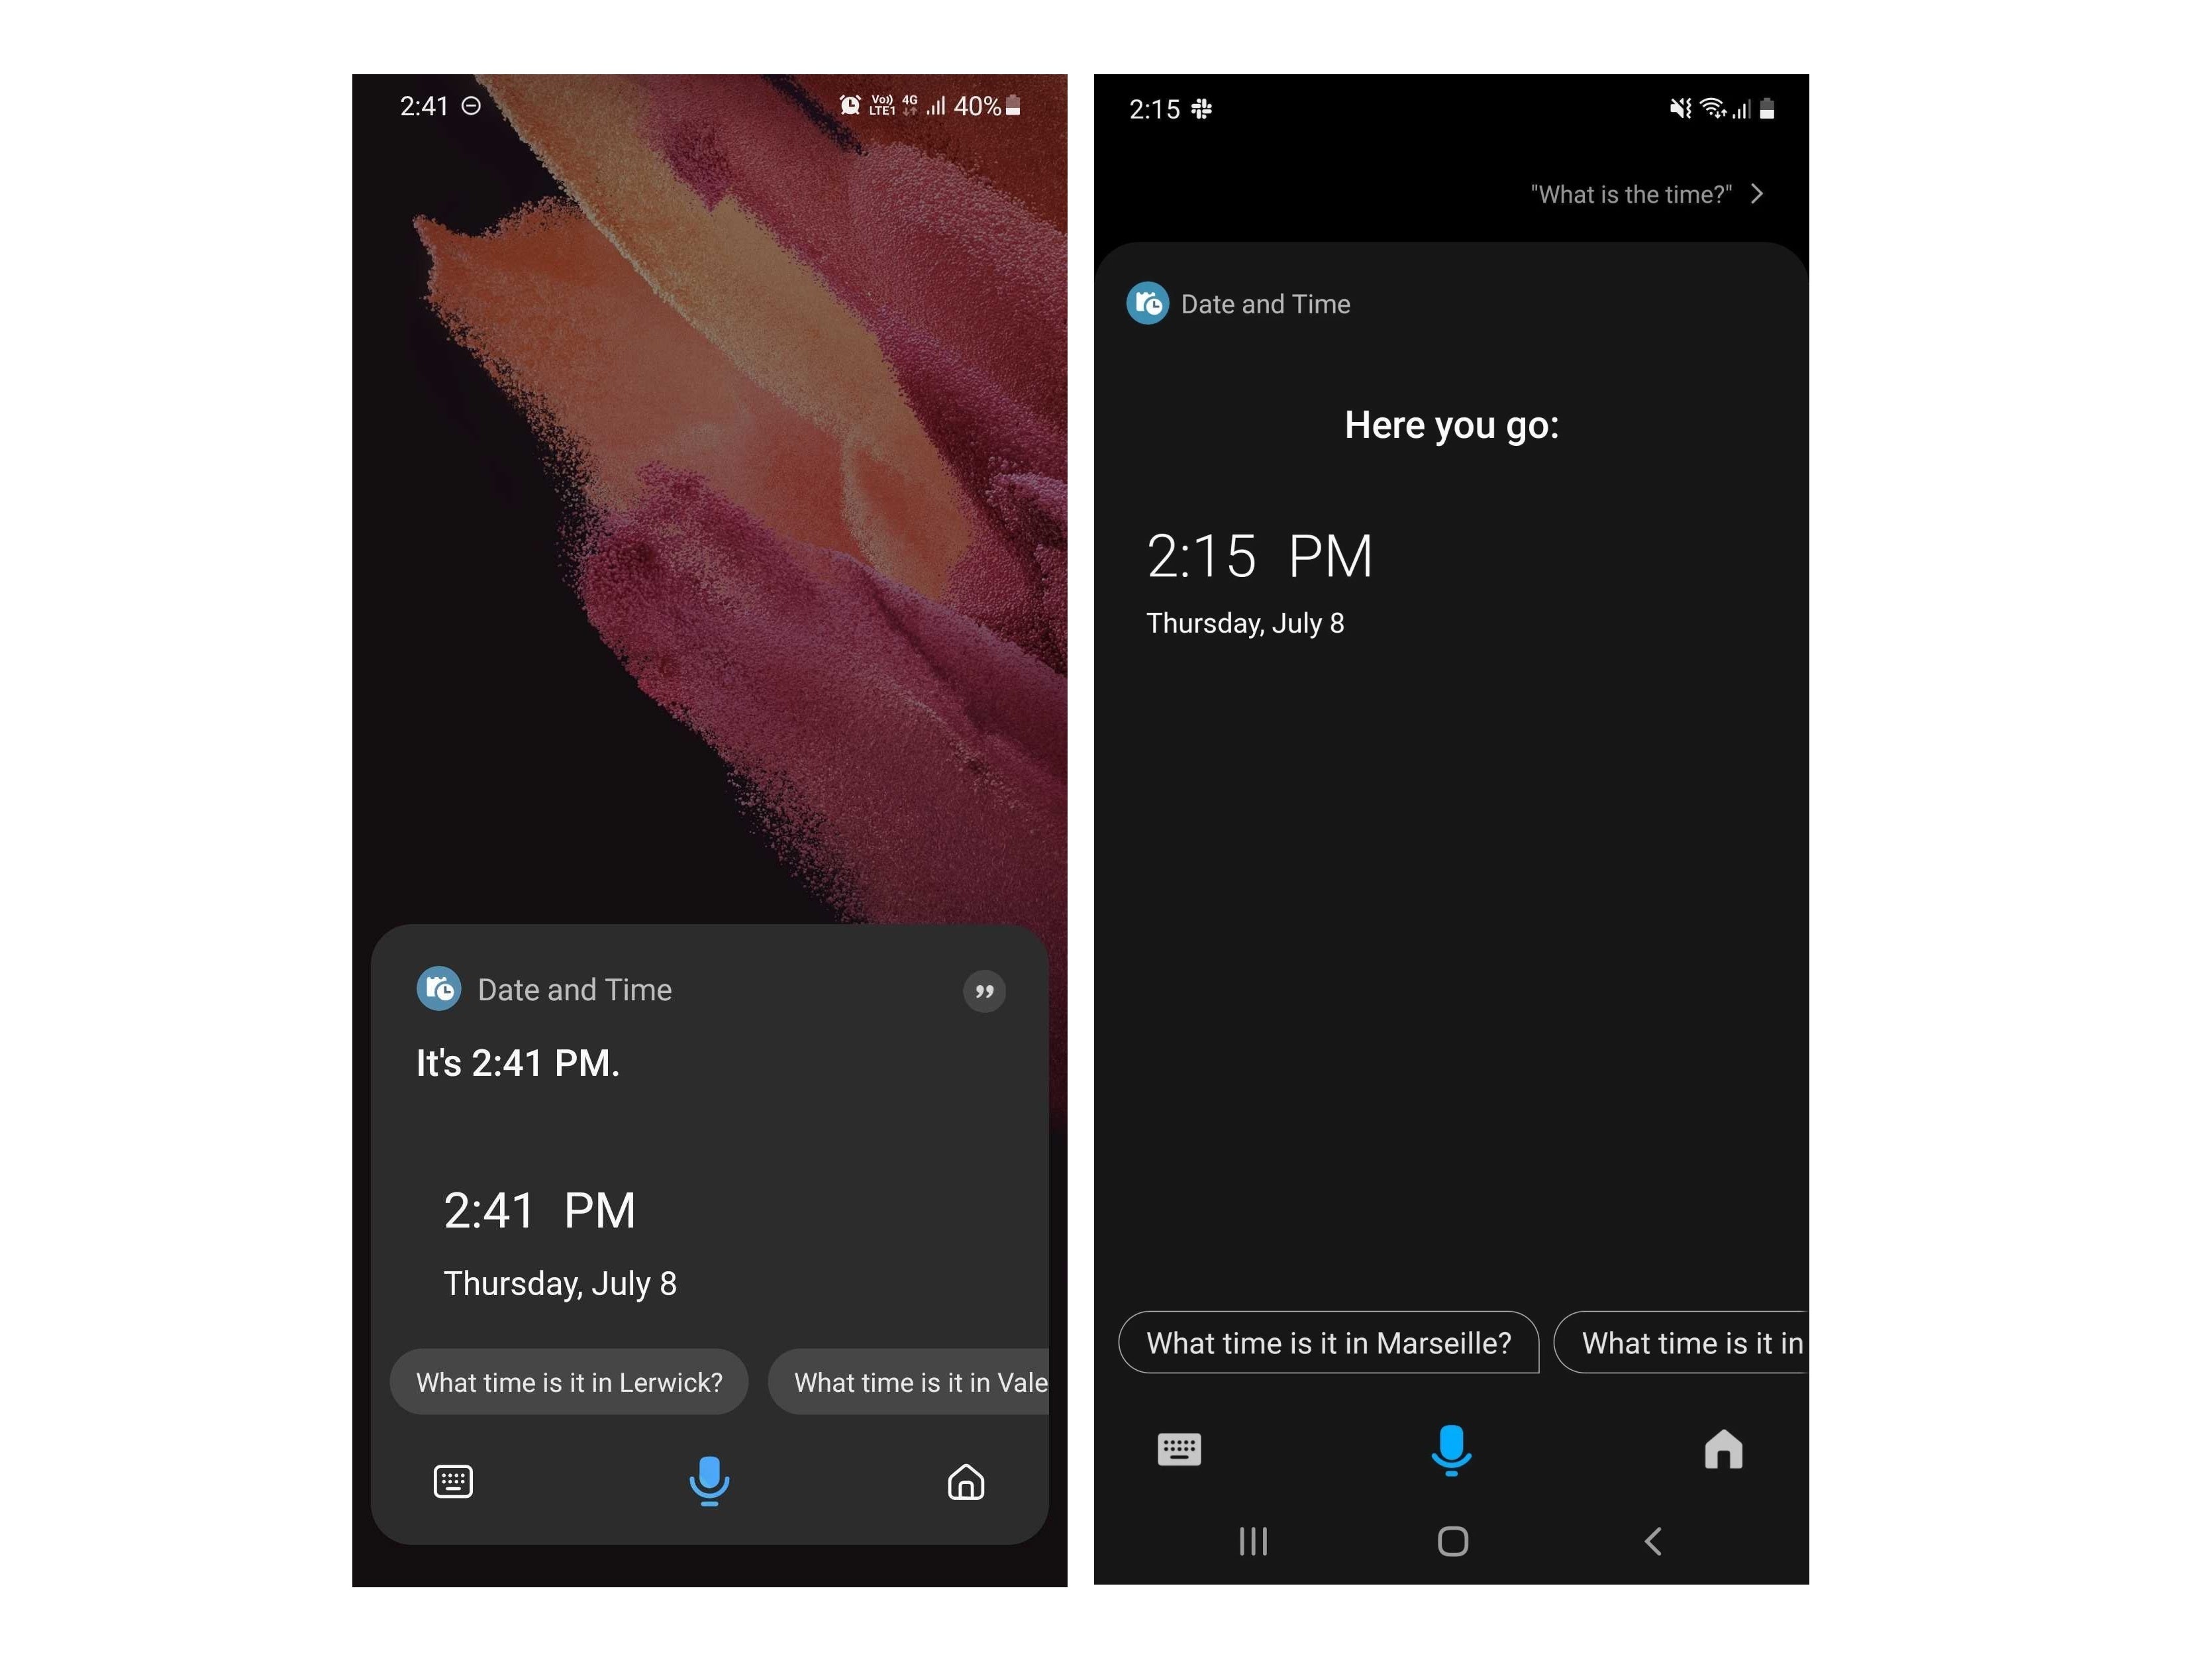 Image source - sammobile - Bixby is still alive - new update brings improvements, refined experience